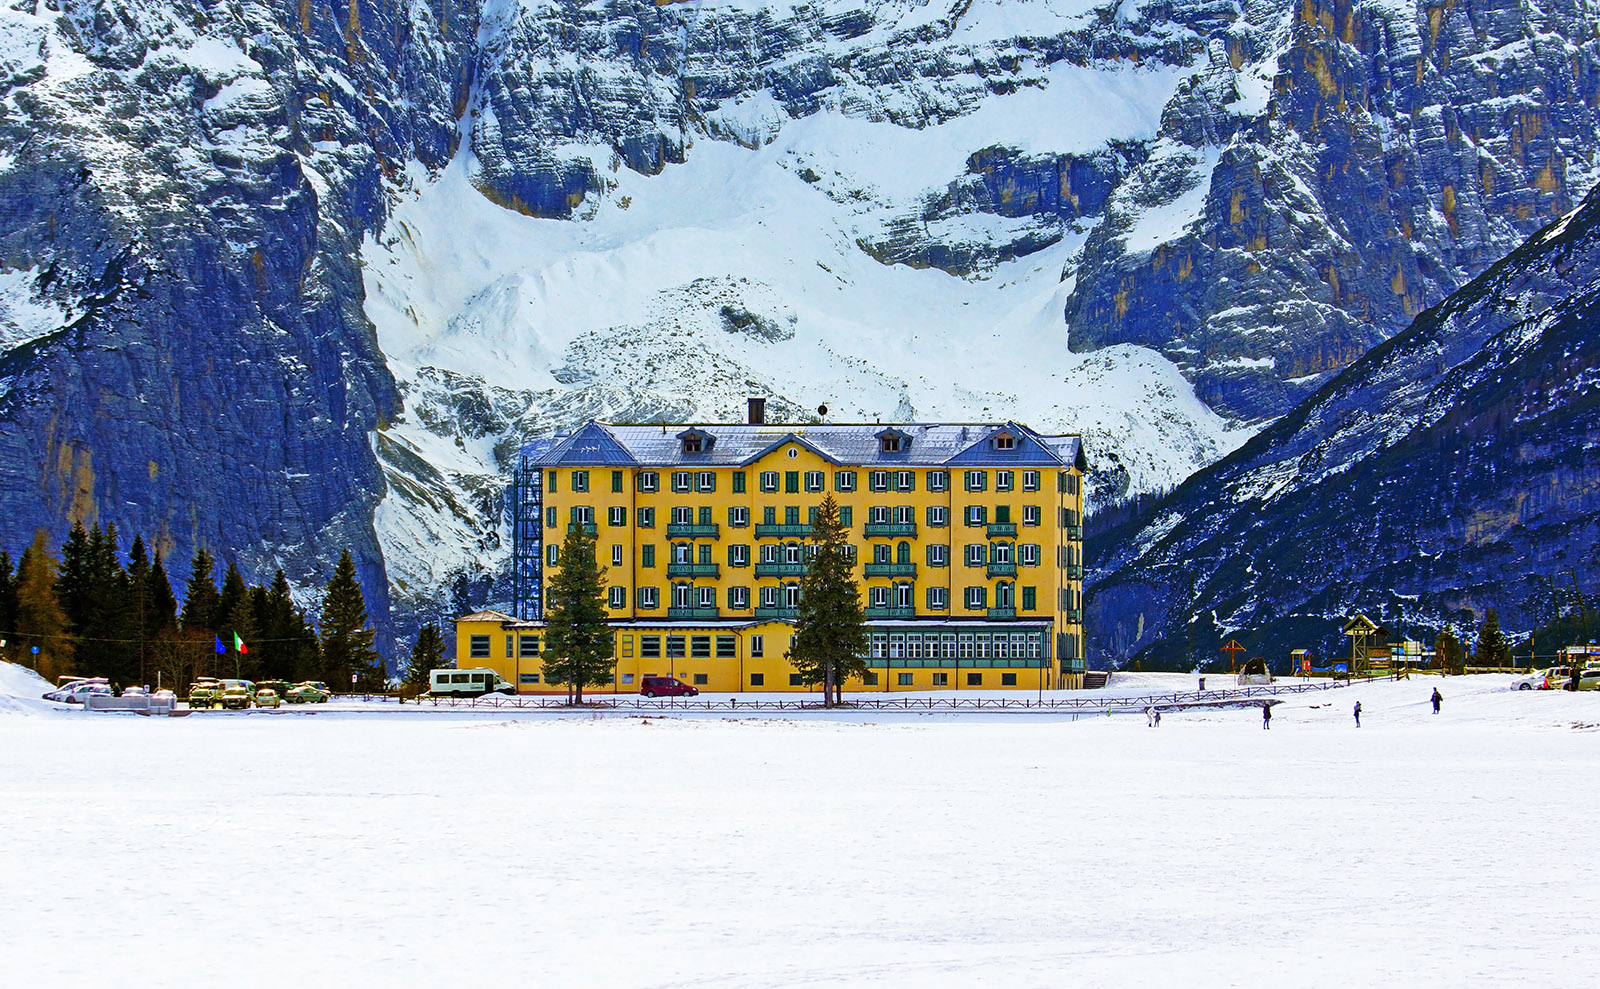 large yellow hotel on a snowy mountain